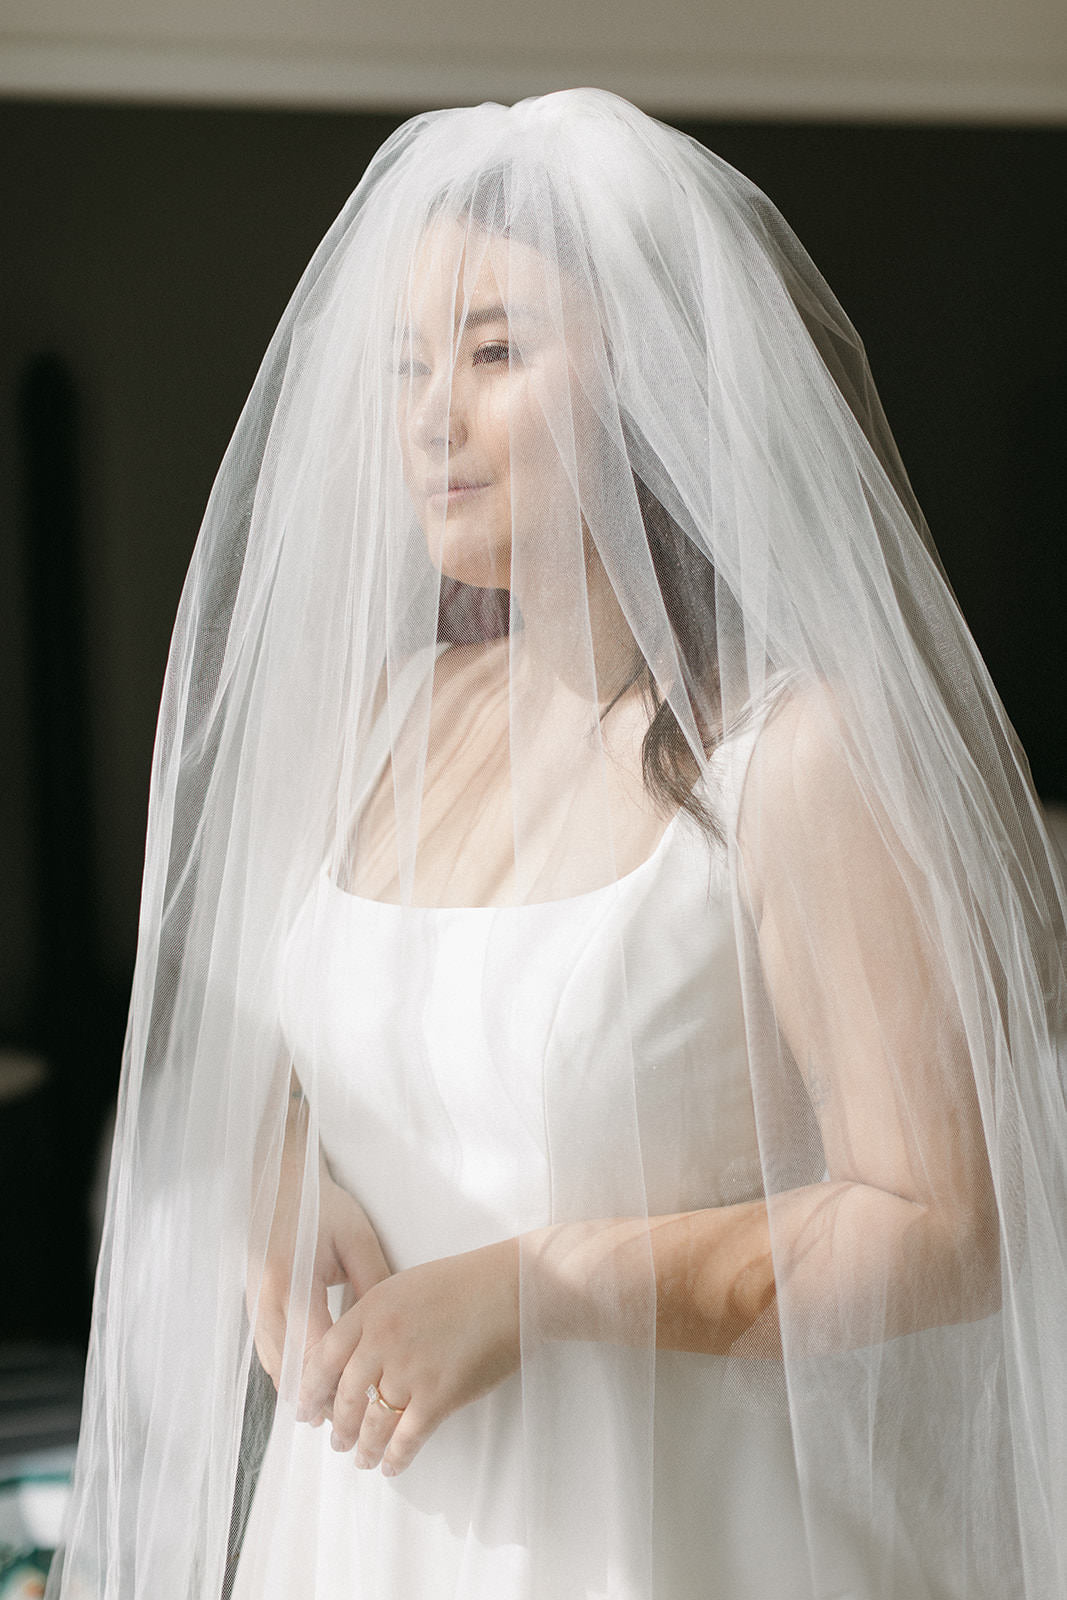 The Making of a Custom Wedding Veil - The New York Times